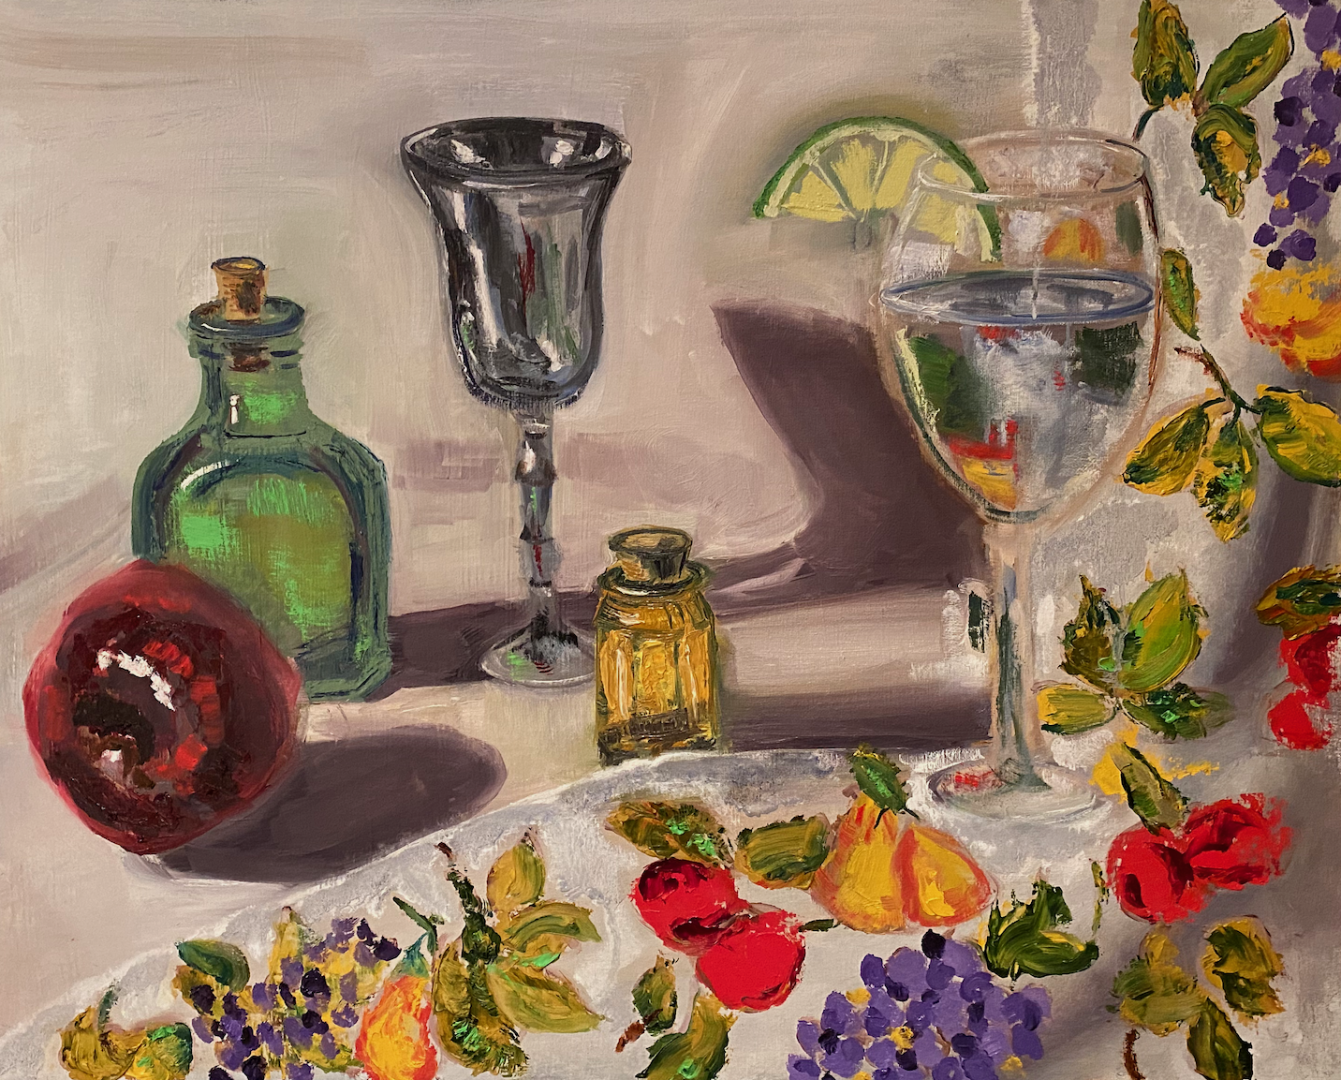 "Still Life with Green Bottle"